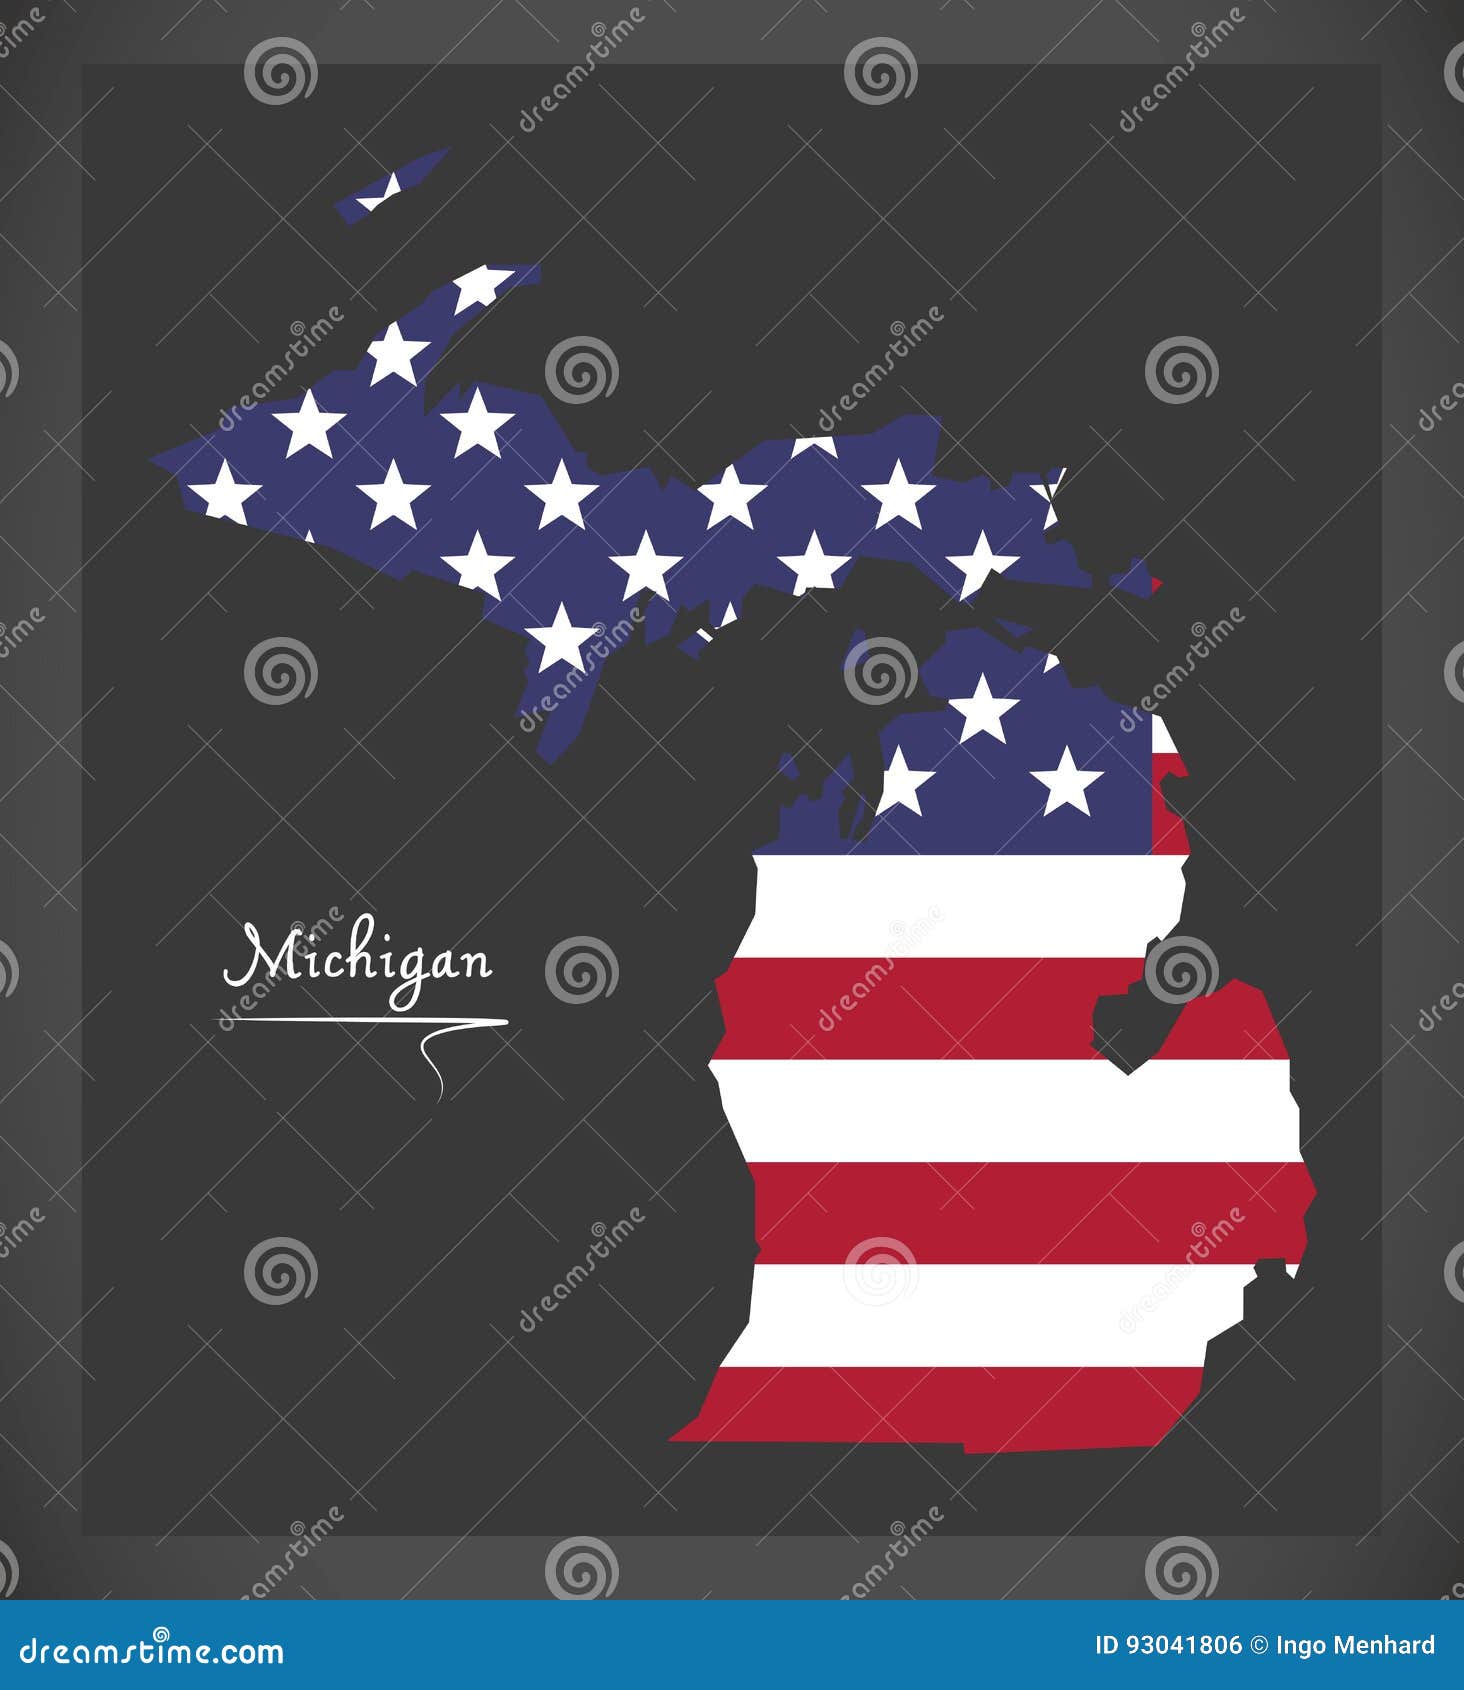 US United America American Nation National Document Court Courthouse Art .JPGClip Art Design Graphic Michigan State Seal Flag U.S